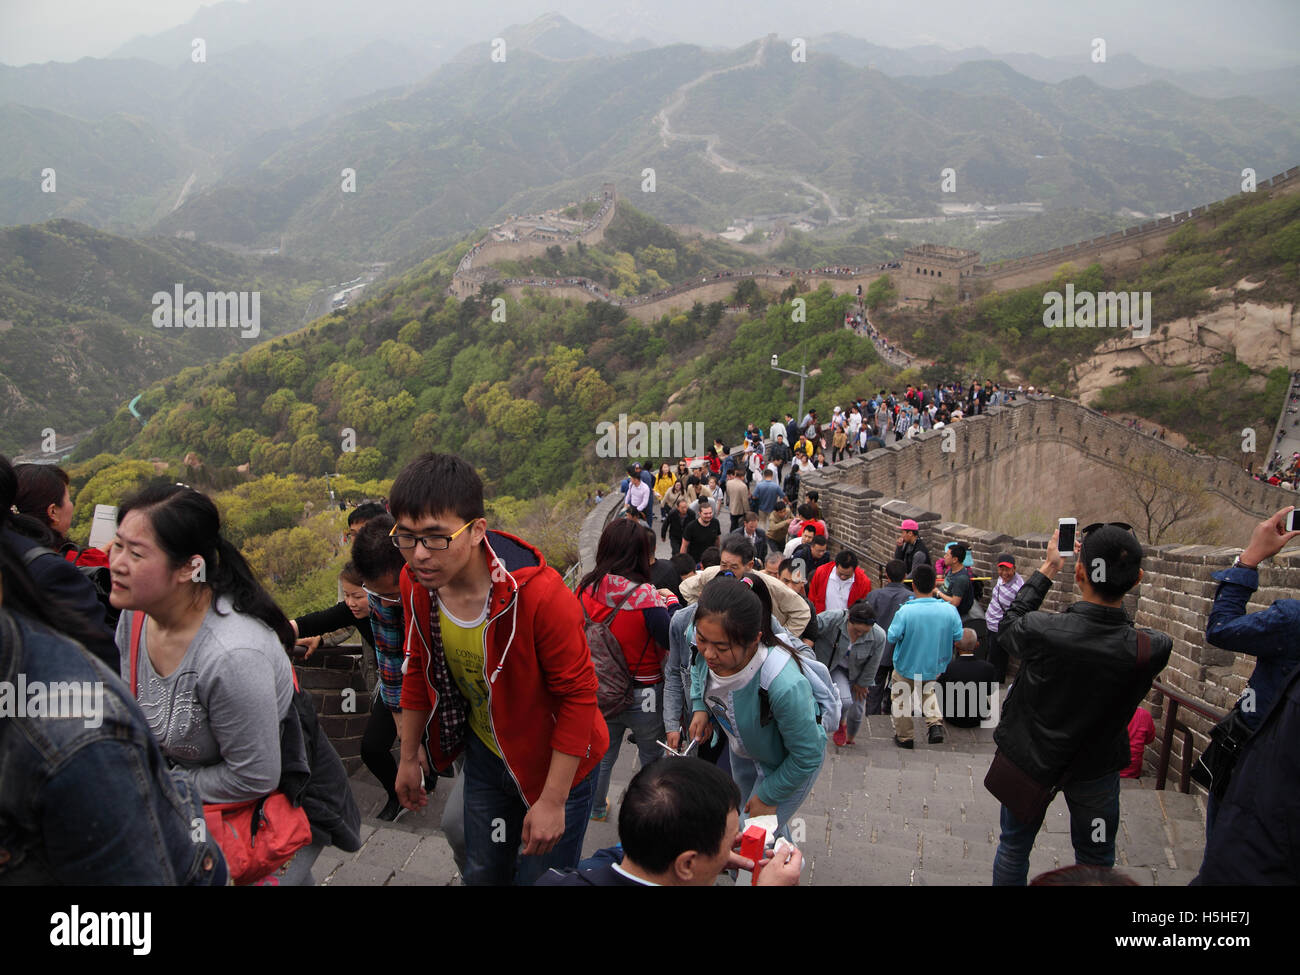 Thousands of tourists, some take photos with smartphones, climb the Great Wall of China going along the rugged mountains. Badaling near Beijing, China. Stock Photo